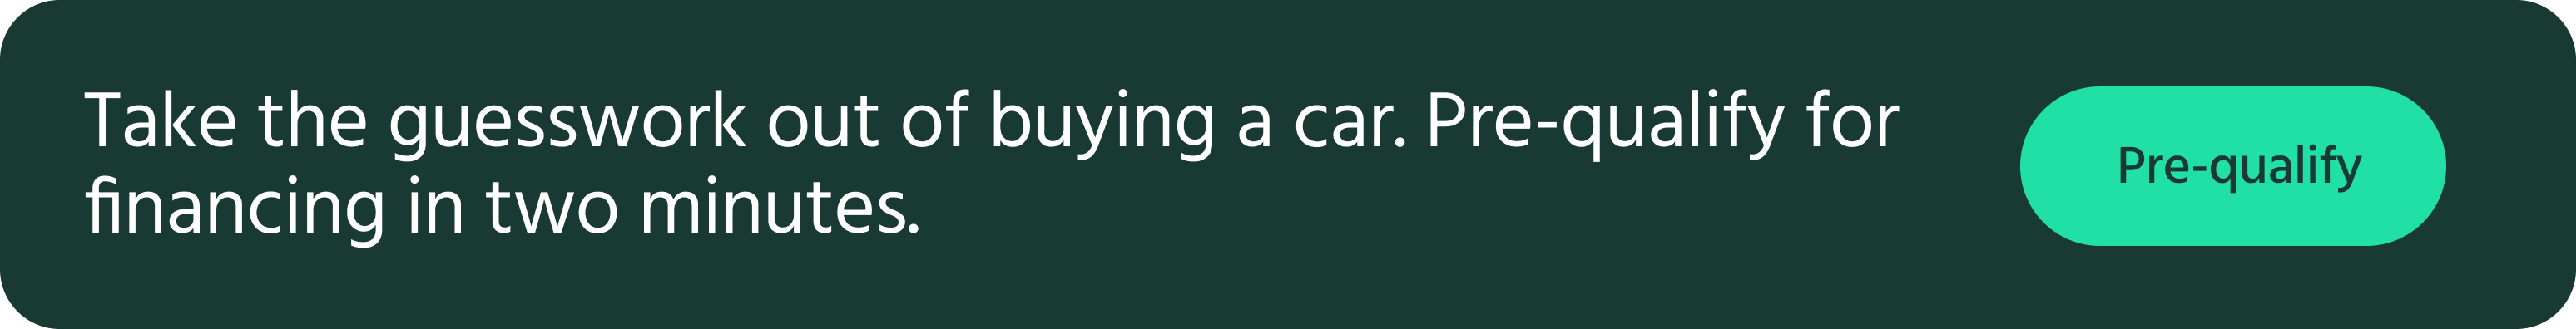 Pre-qualify for a car in two minutes with no impact on your credit score.